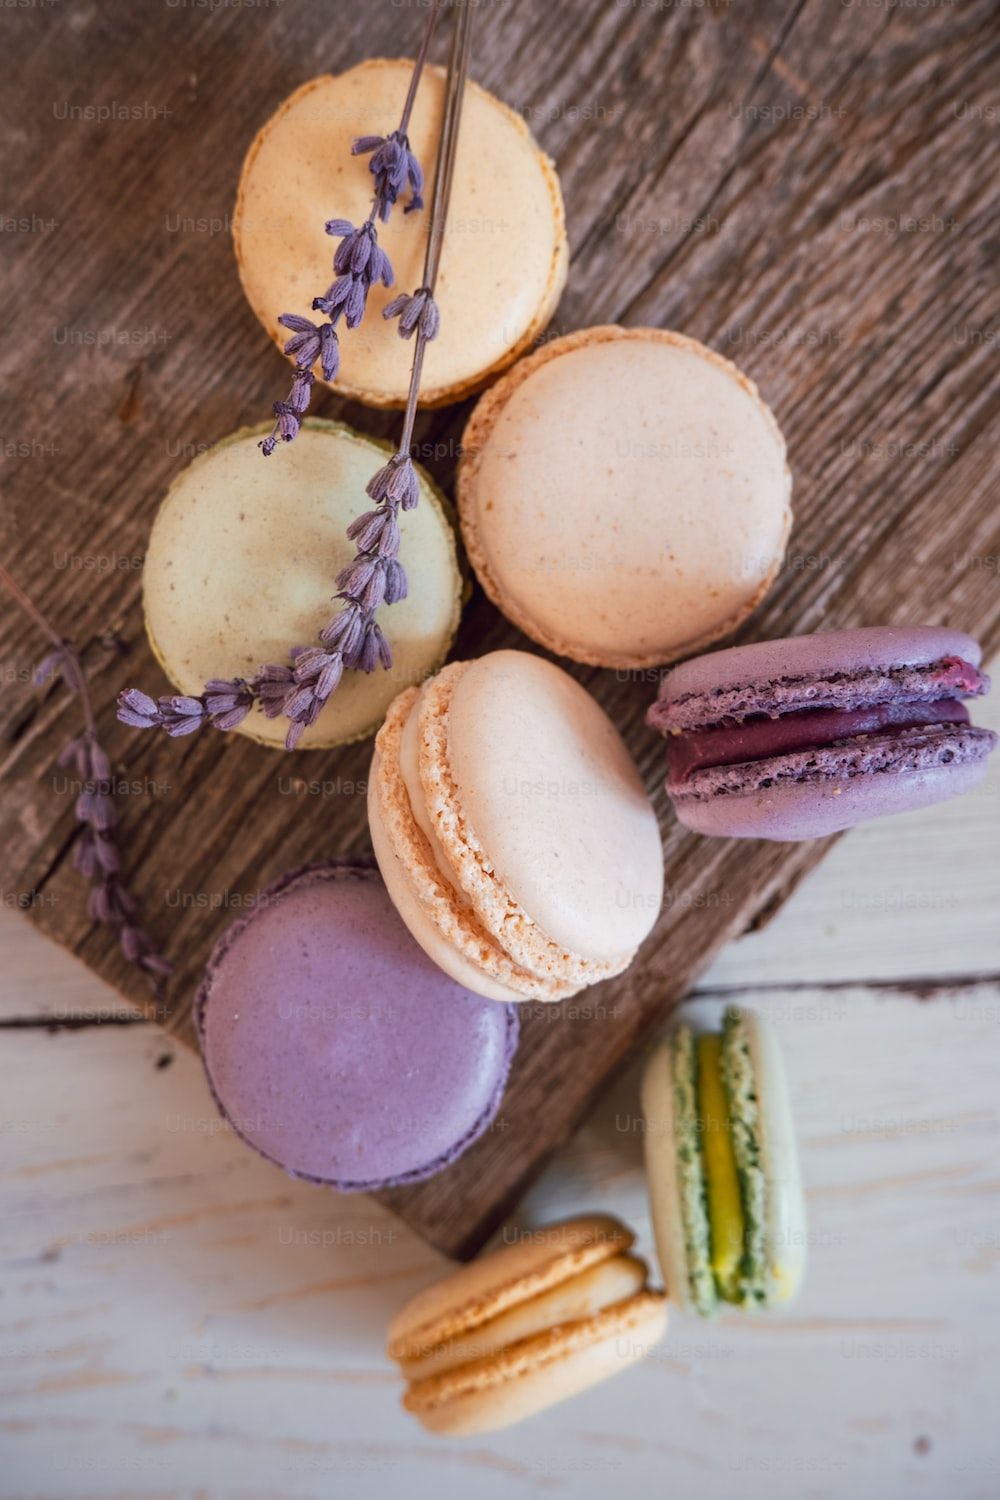 French macarons on a wooden board with lavender flowers - Macarons